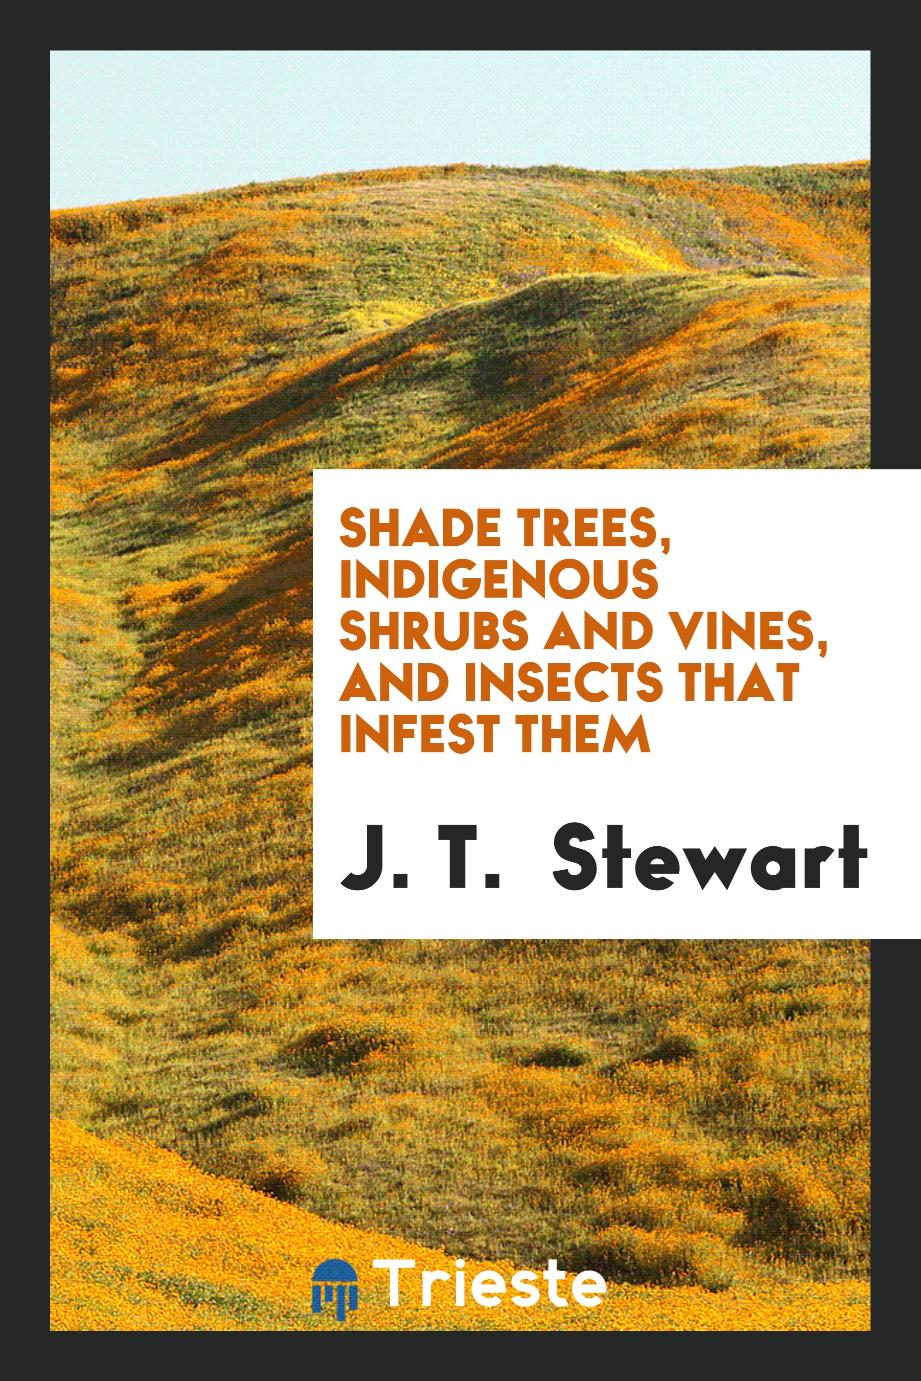 Shade trees, indigenous shrubs and vines, and insects that infest them